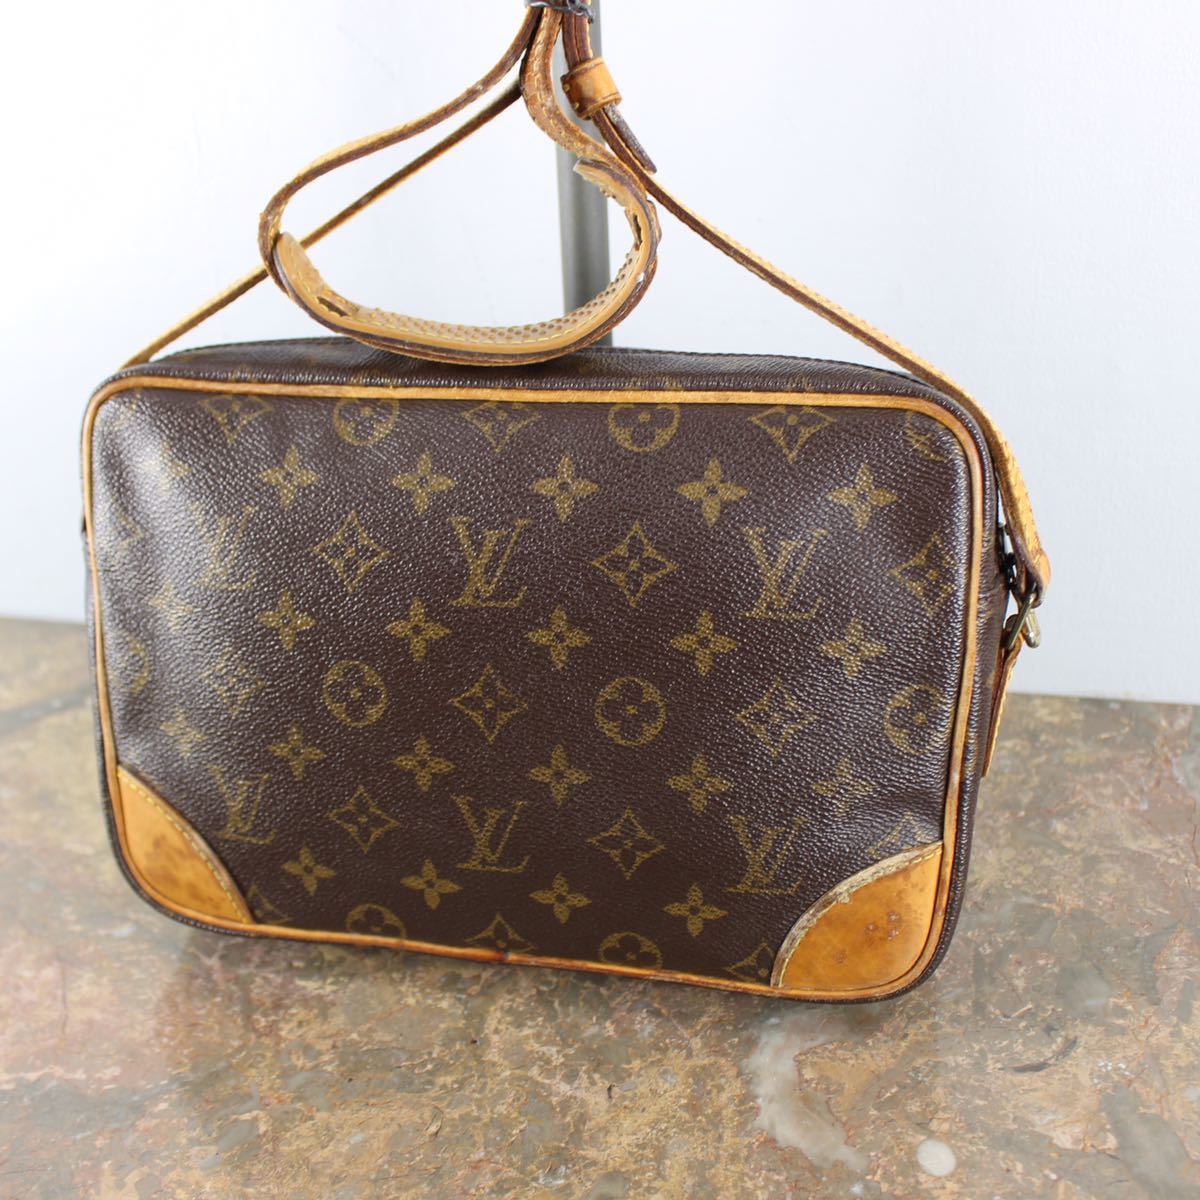 LOUIS VUITTON M51276 MB1020 MONOGRAM PATTERNED SHOULDER BAG MADE IN  FRANCE/ルイヴィトントロカデロモノグラム柄ショルダーバッグ